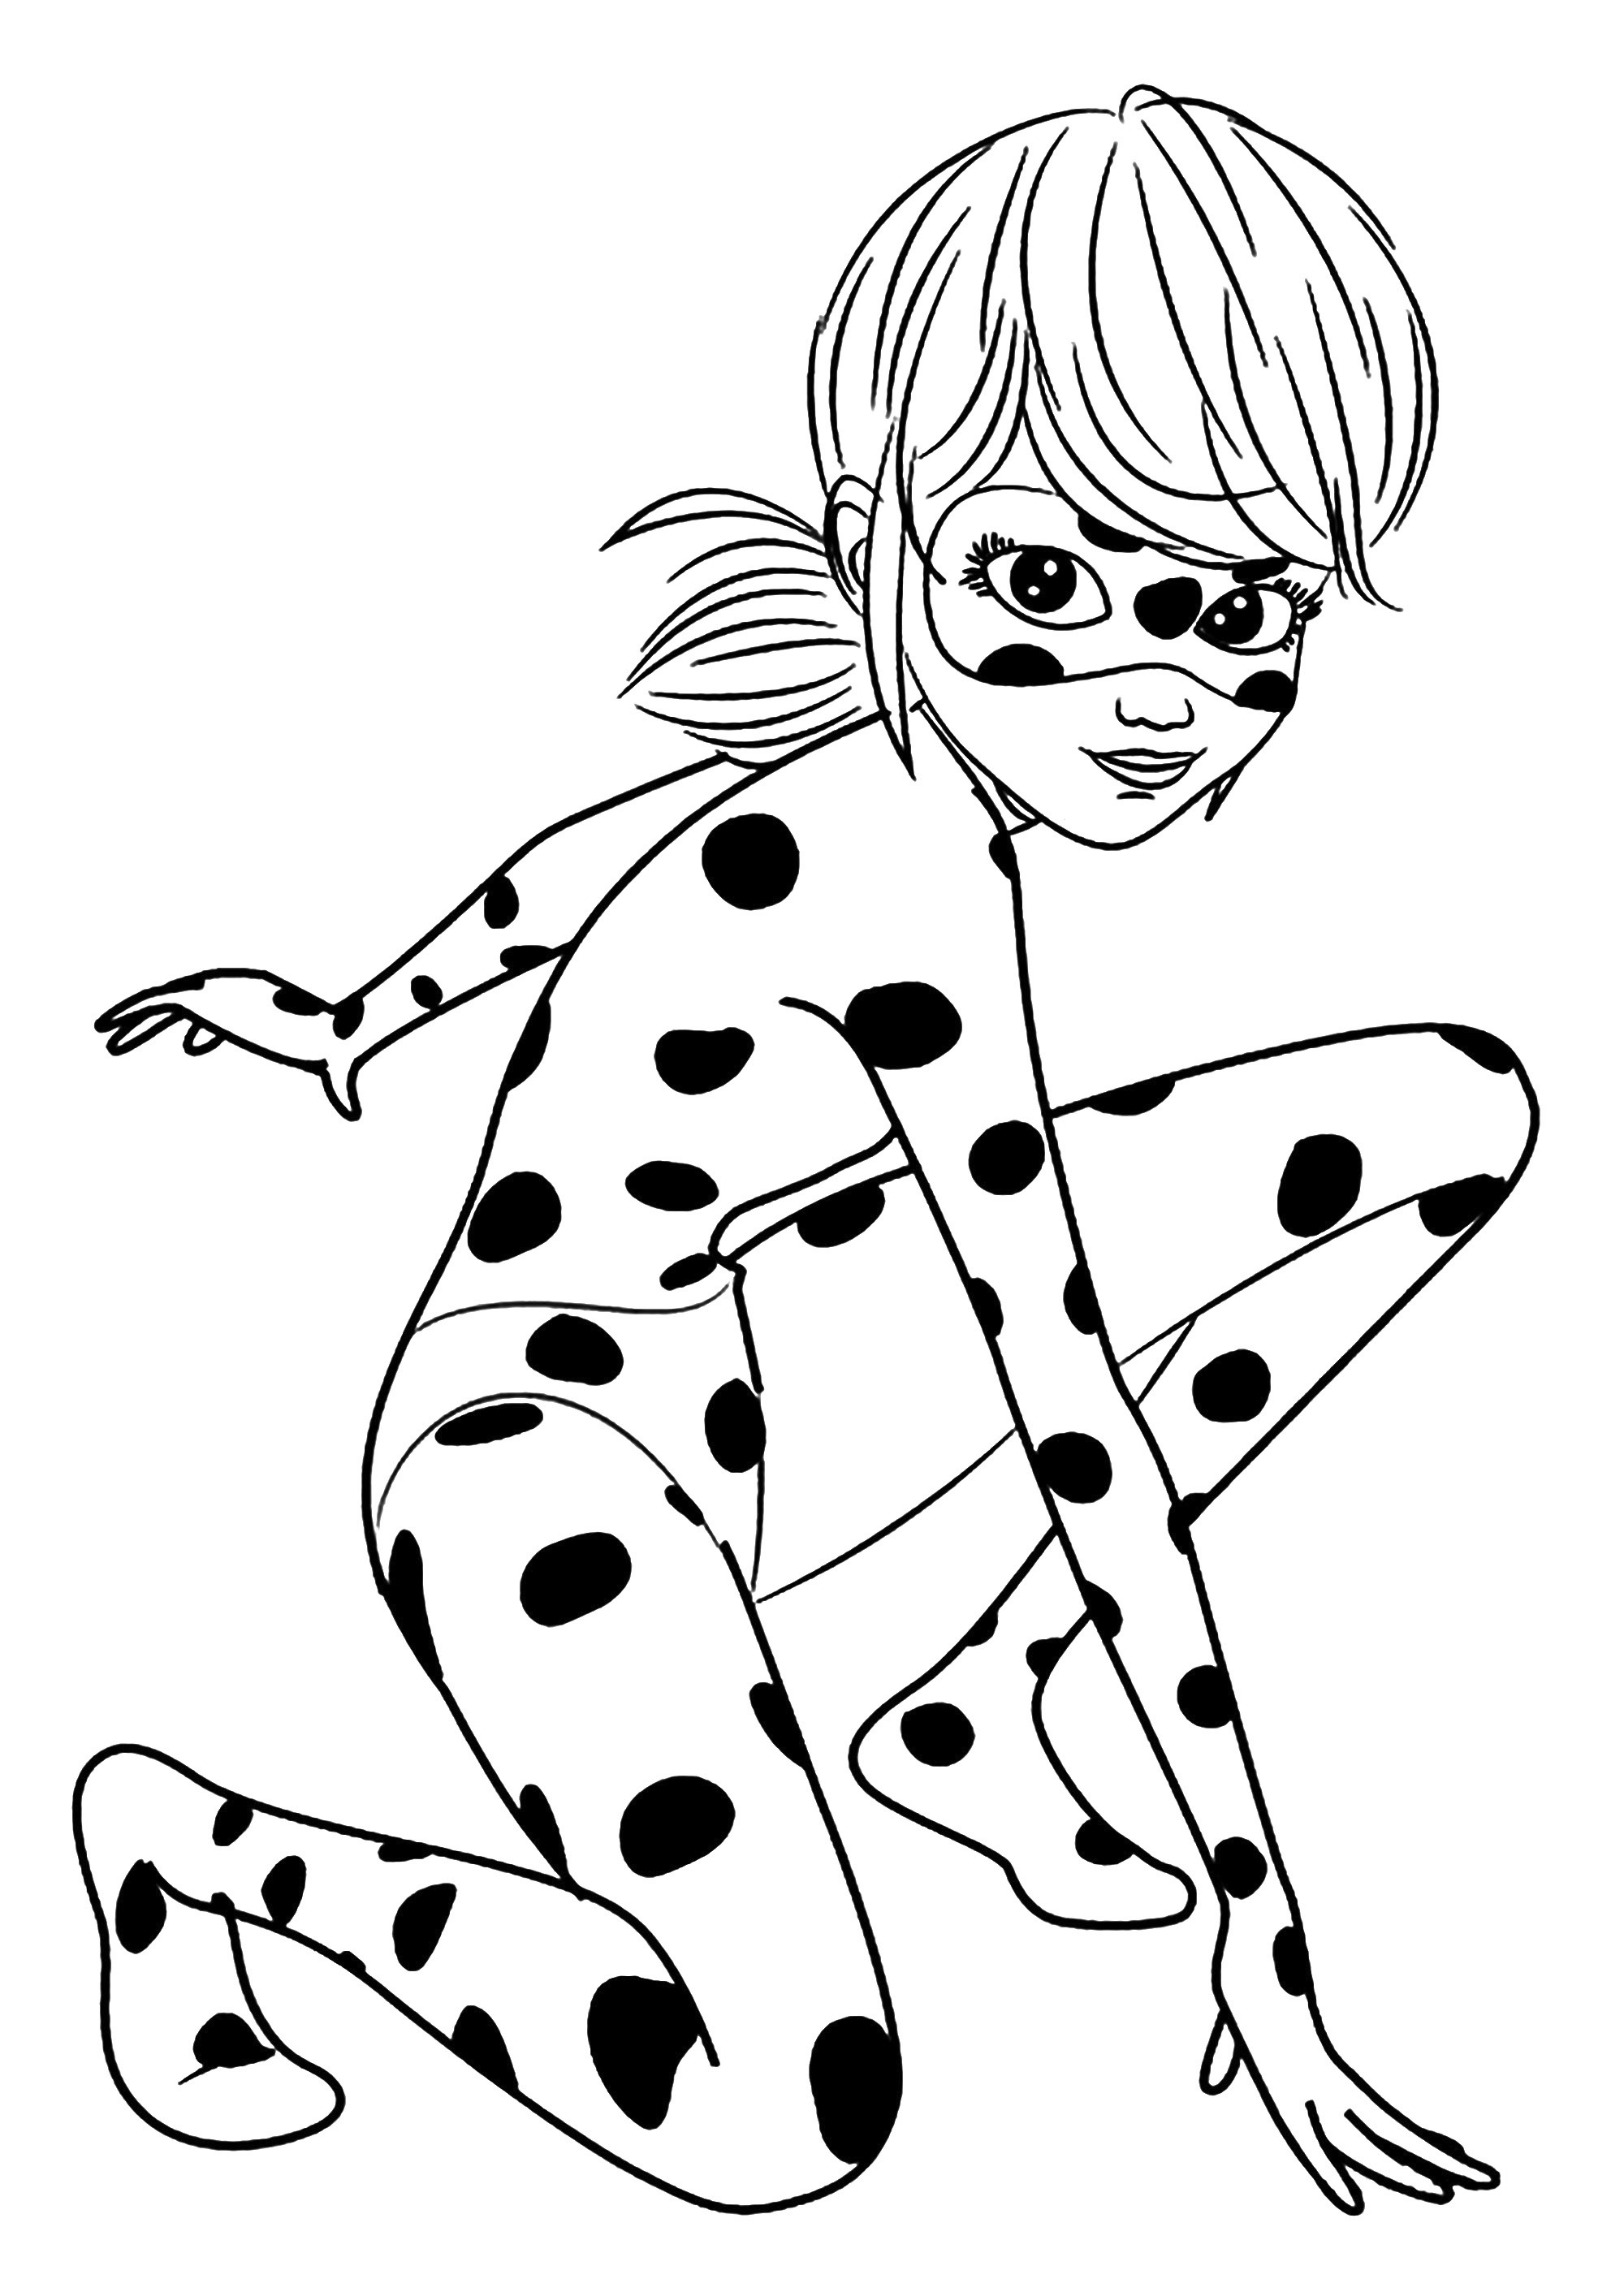 Miraculous / Lady bug : coloring for children - Miraculous / LadyBug Kids  Coloring Pages